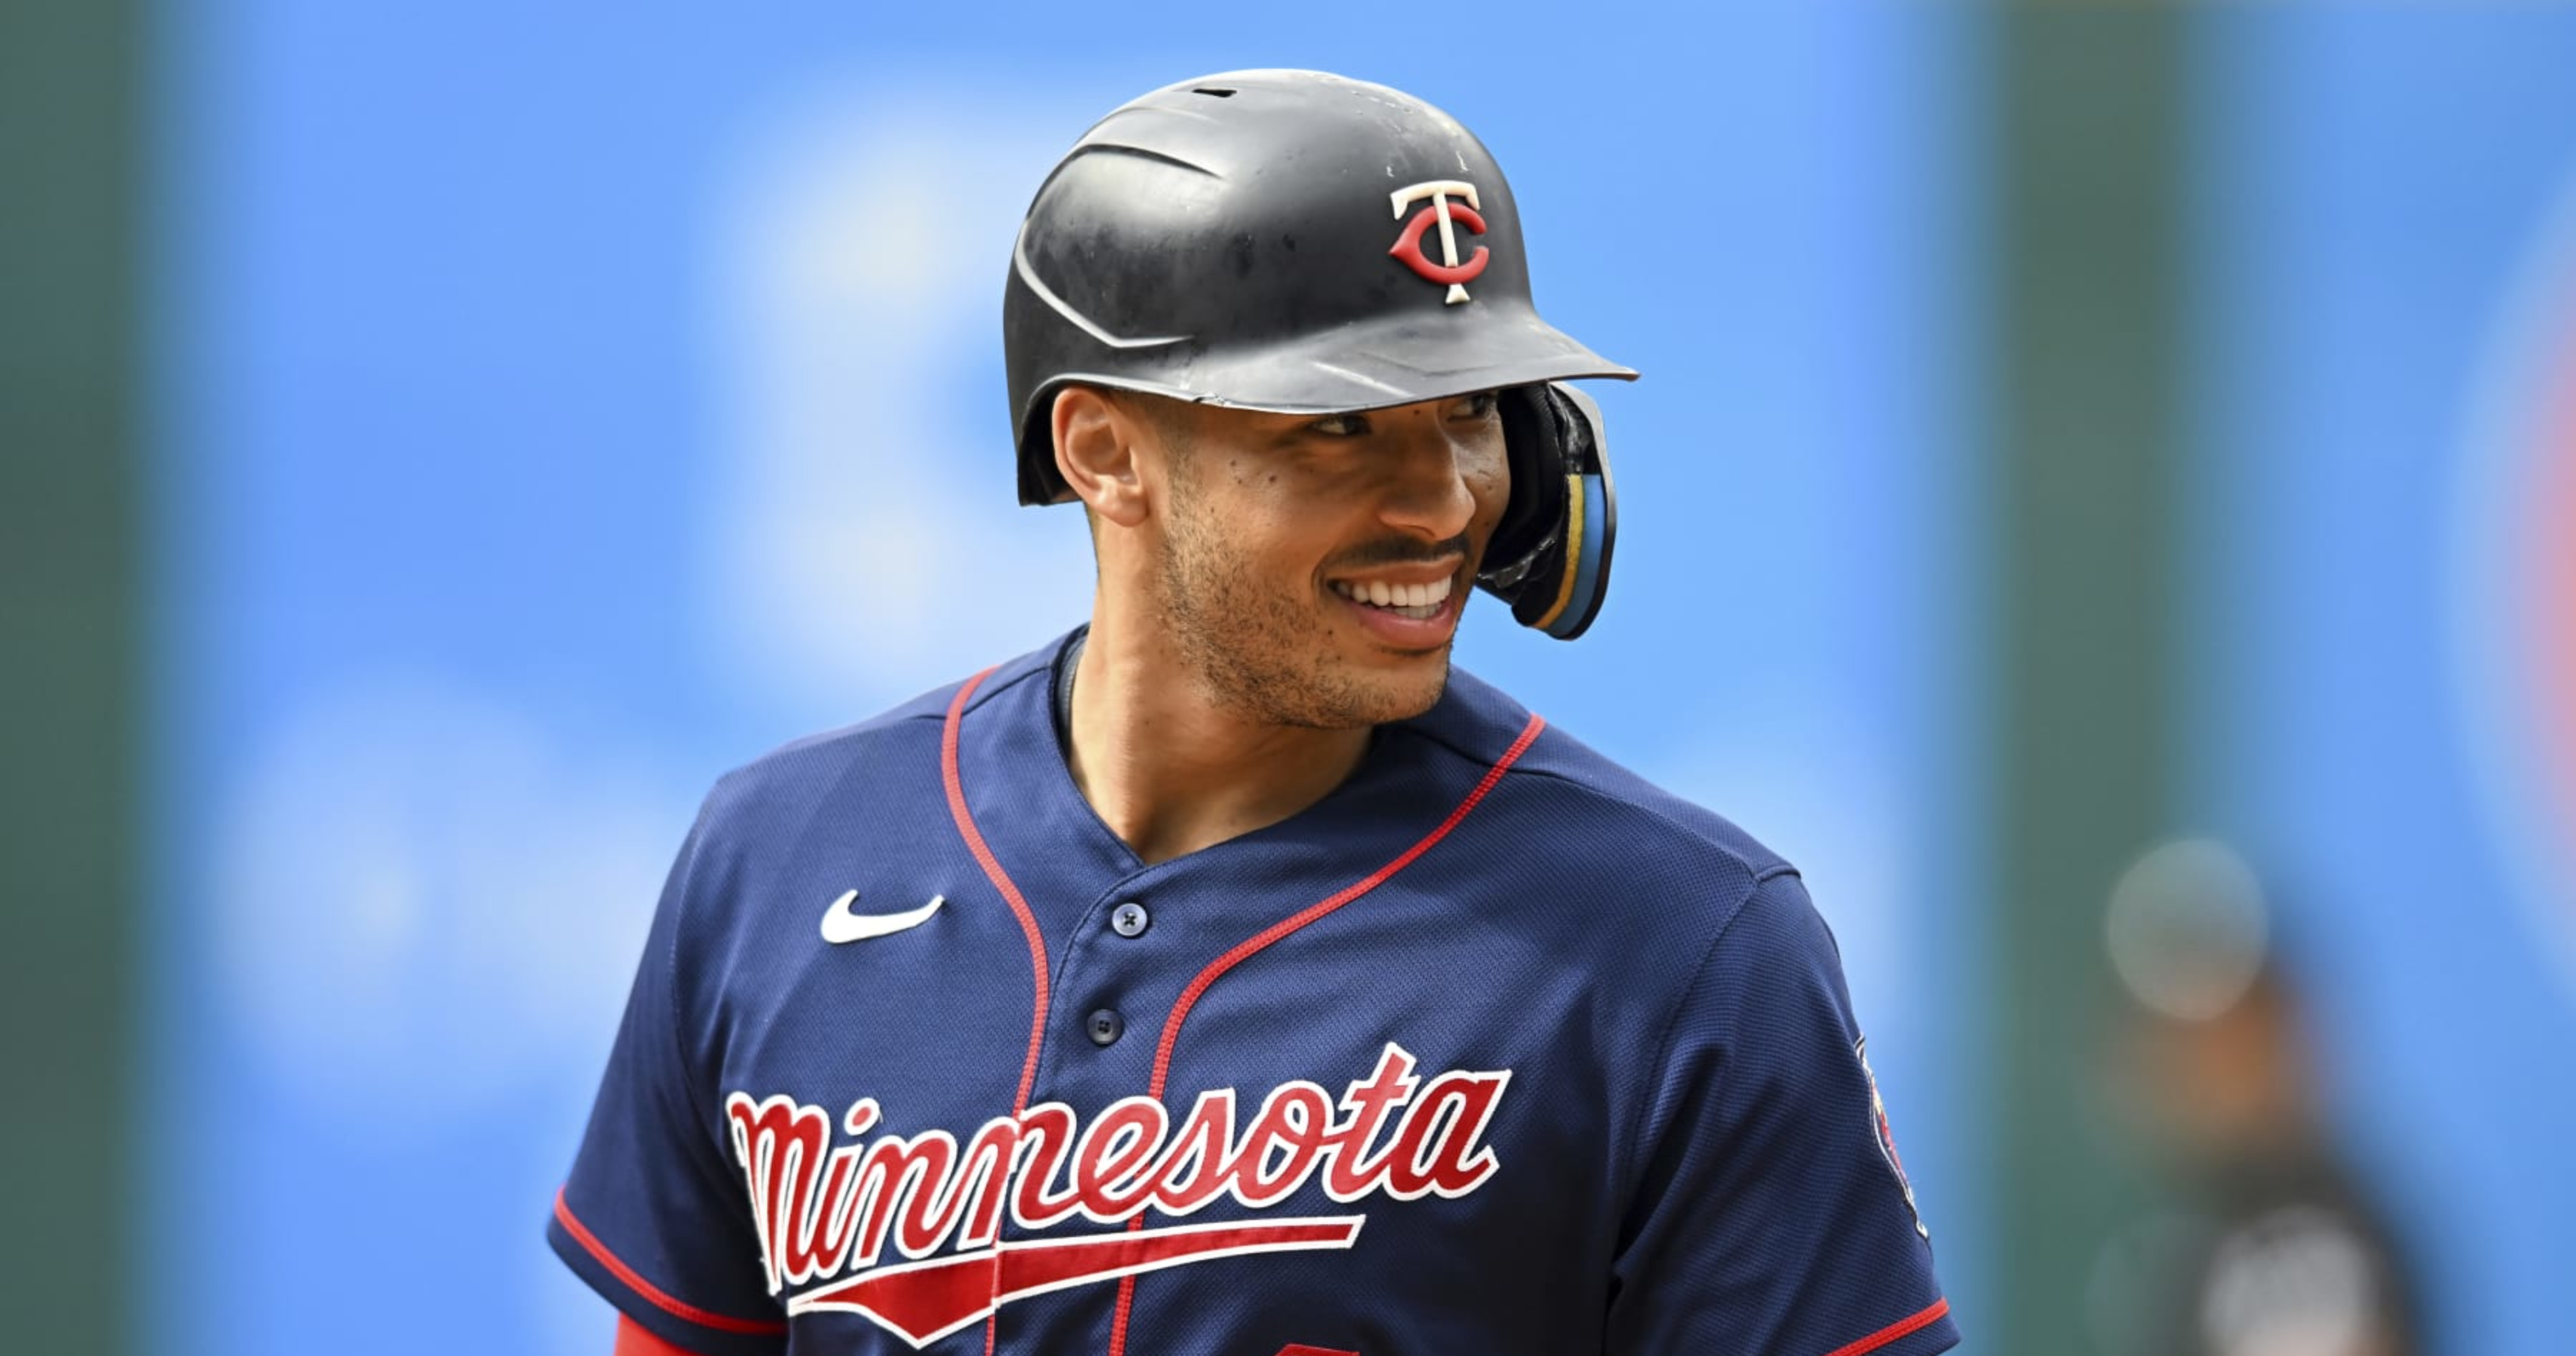 Report: Mets have concerns about Carlos Correa's physical